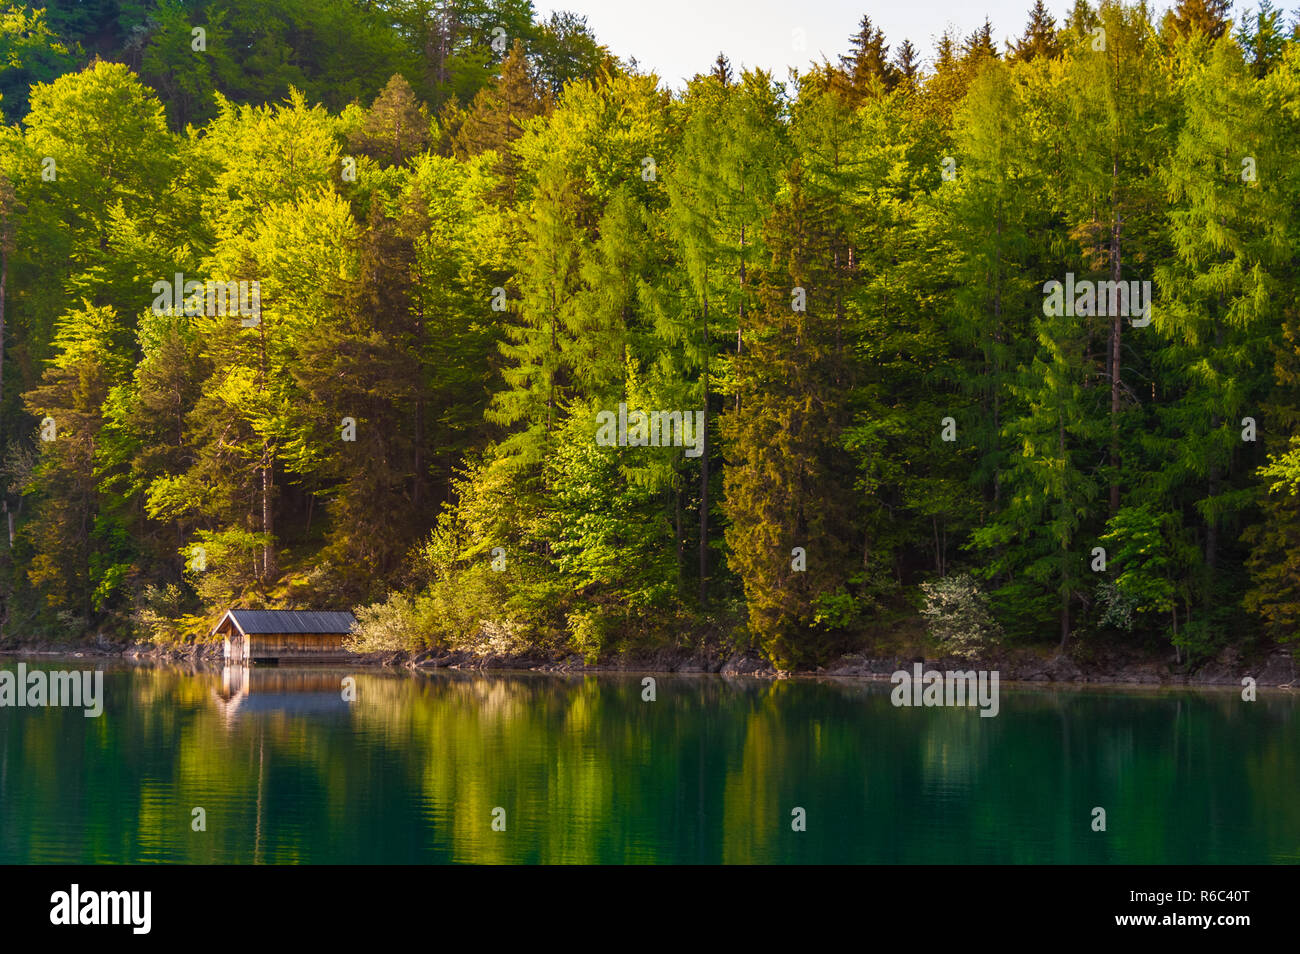 Magnificent landscape view of a wooden boat shed at the shore of the famous Alpsee lake in front of a forest border in Bavaria, Germany. The tall... Stock Photo